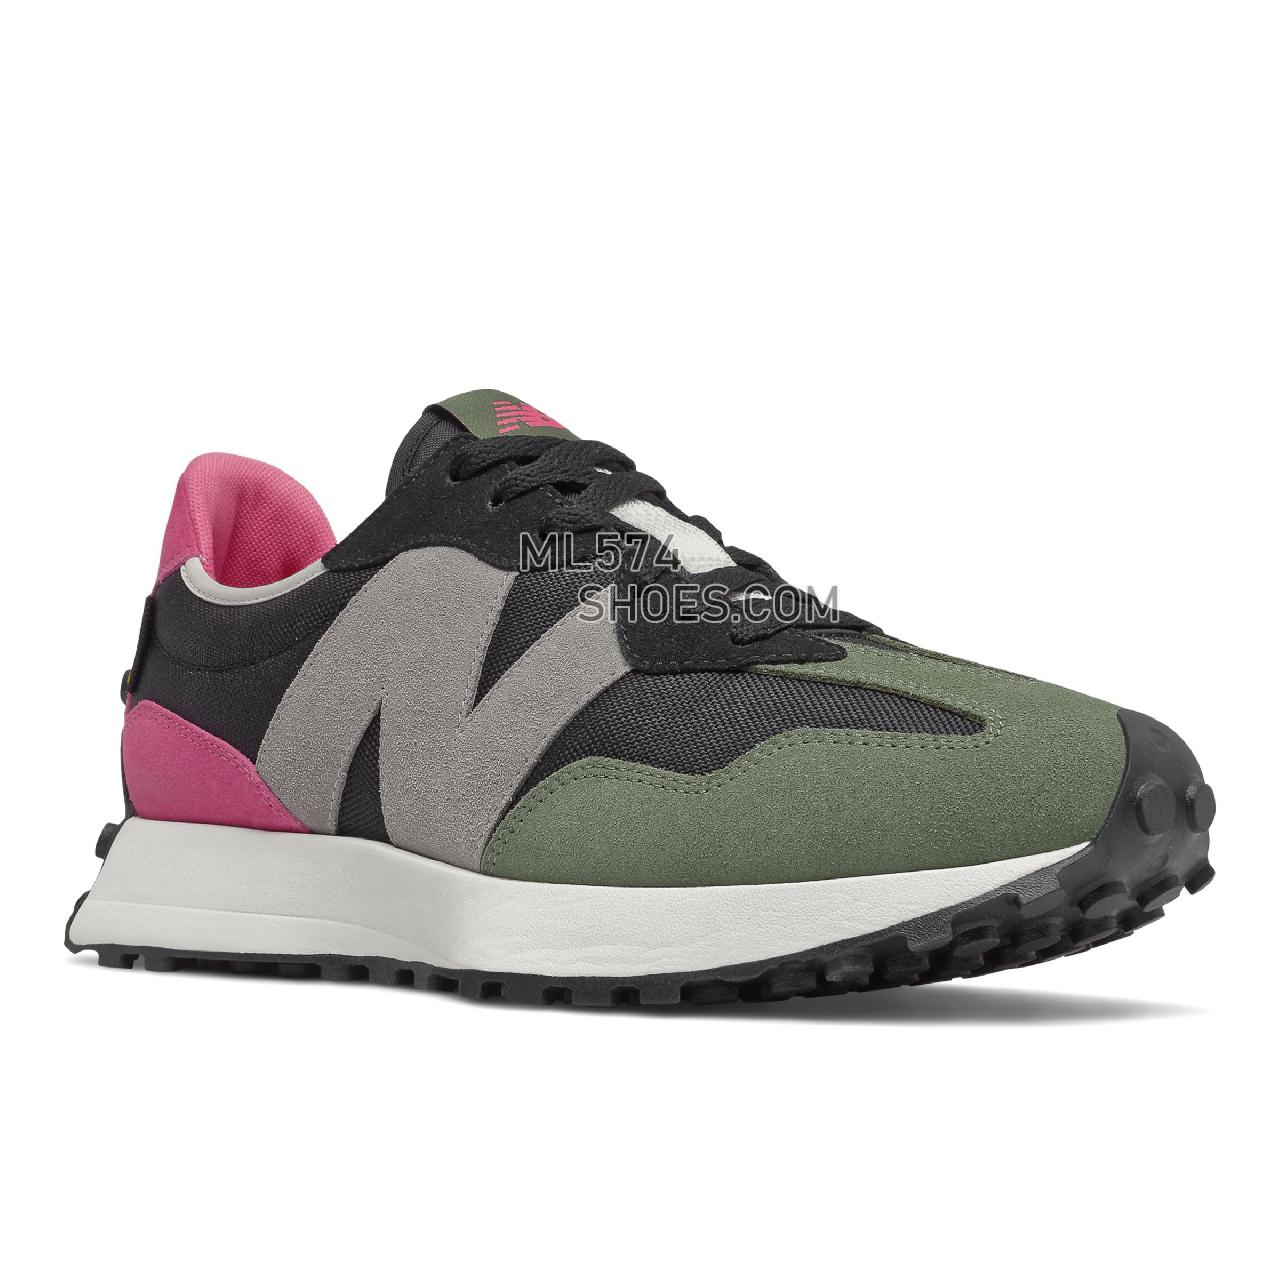 New Balance 327 - Unisex Men's Women's Sport Style Sneakers - Black with Sporty Pink - MS327WR1